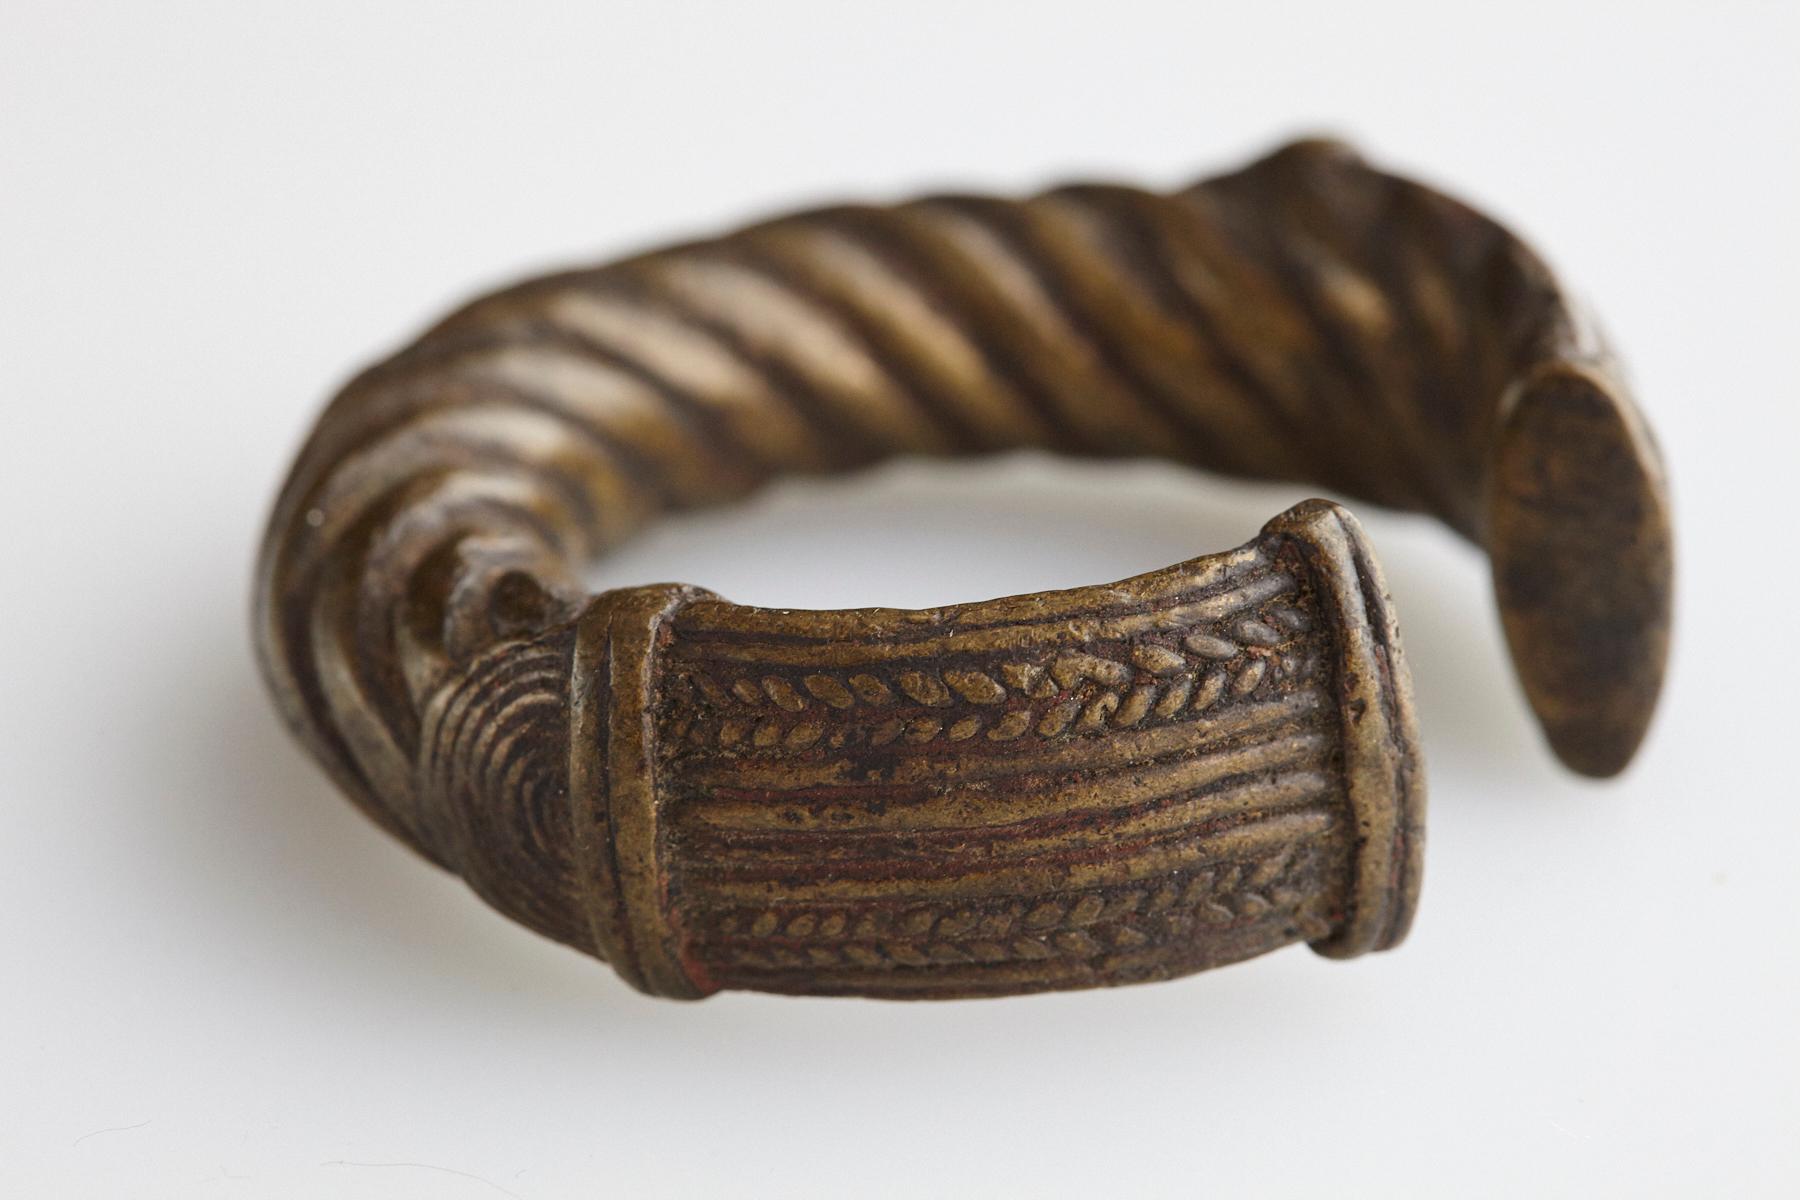 Forged Bronze Currency Bracelet/Manilla, Dogon People, Burkina Faso, 19th c. - No 5 For Sale